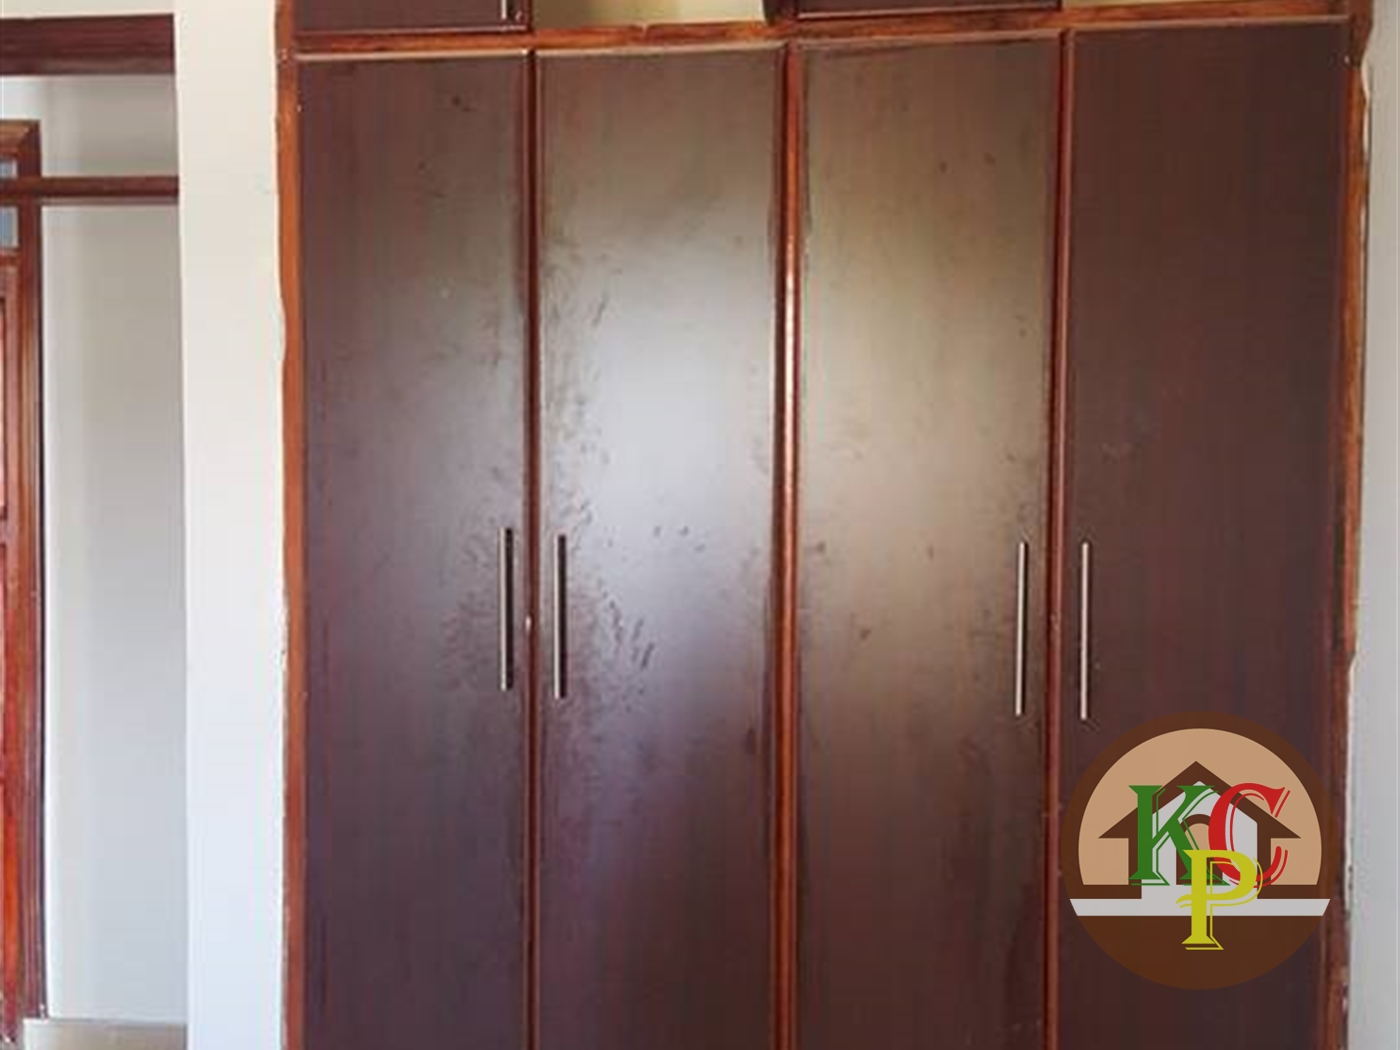 Semi Detached for rent in Njerere Mukono